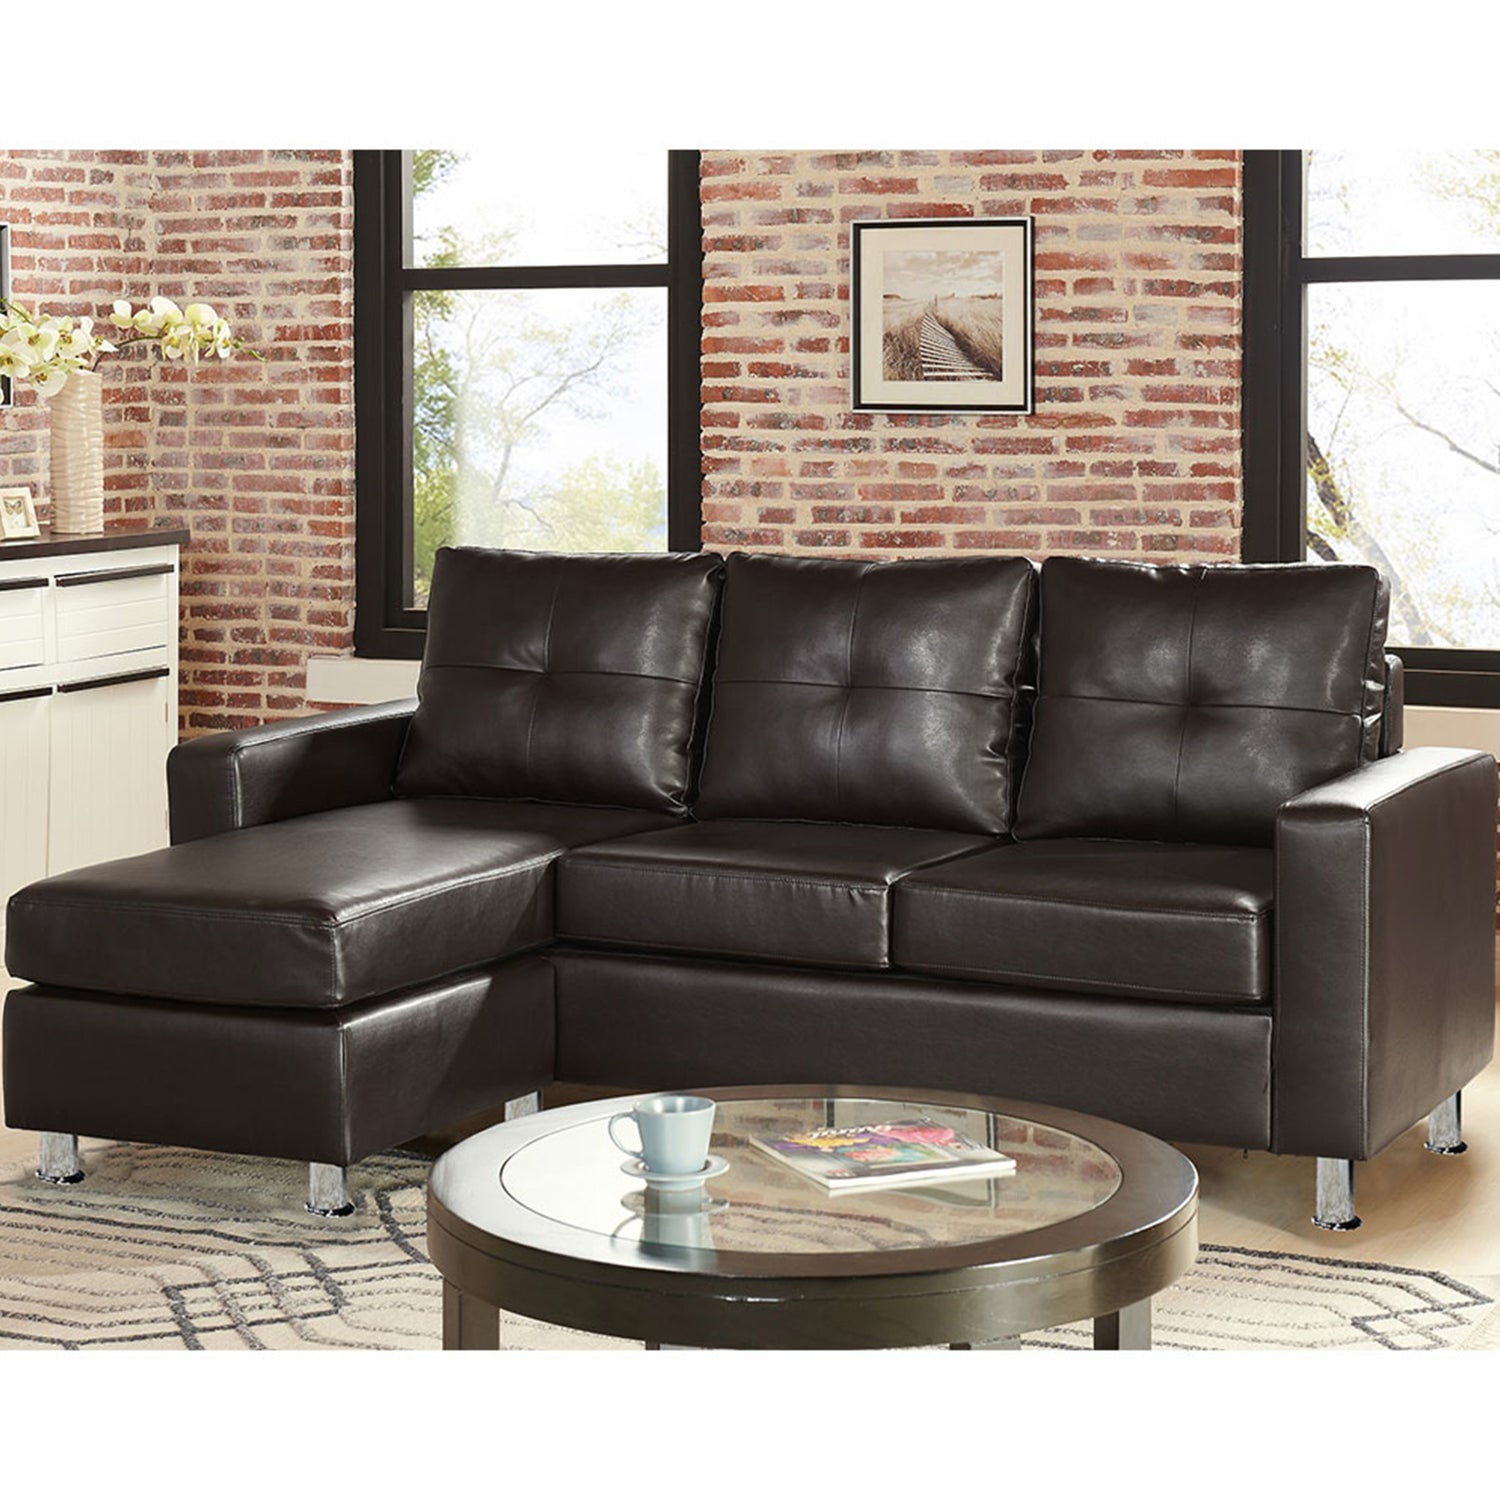 Sarantino Corner Sofa Lounge Couch Modular Furniture Chair Home Faux Leather Chaise Brown-Furniture &gt; Sofas-PEROZ Accessories